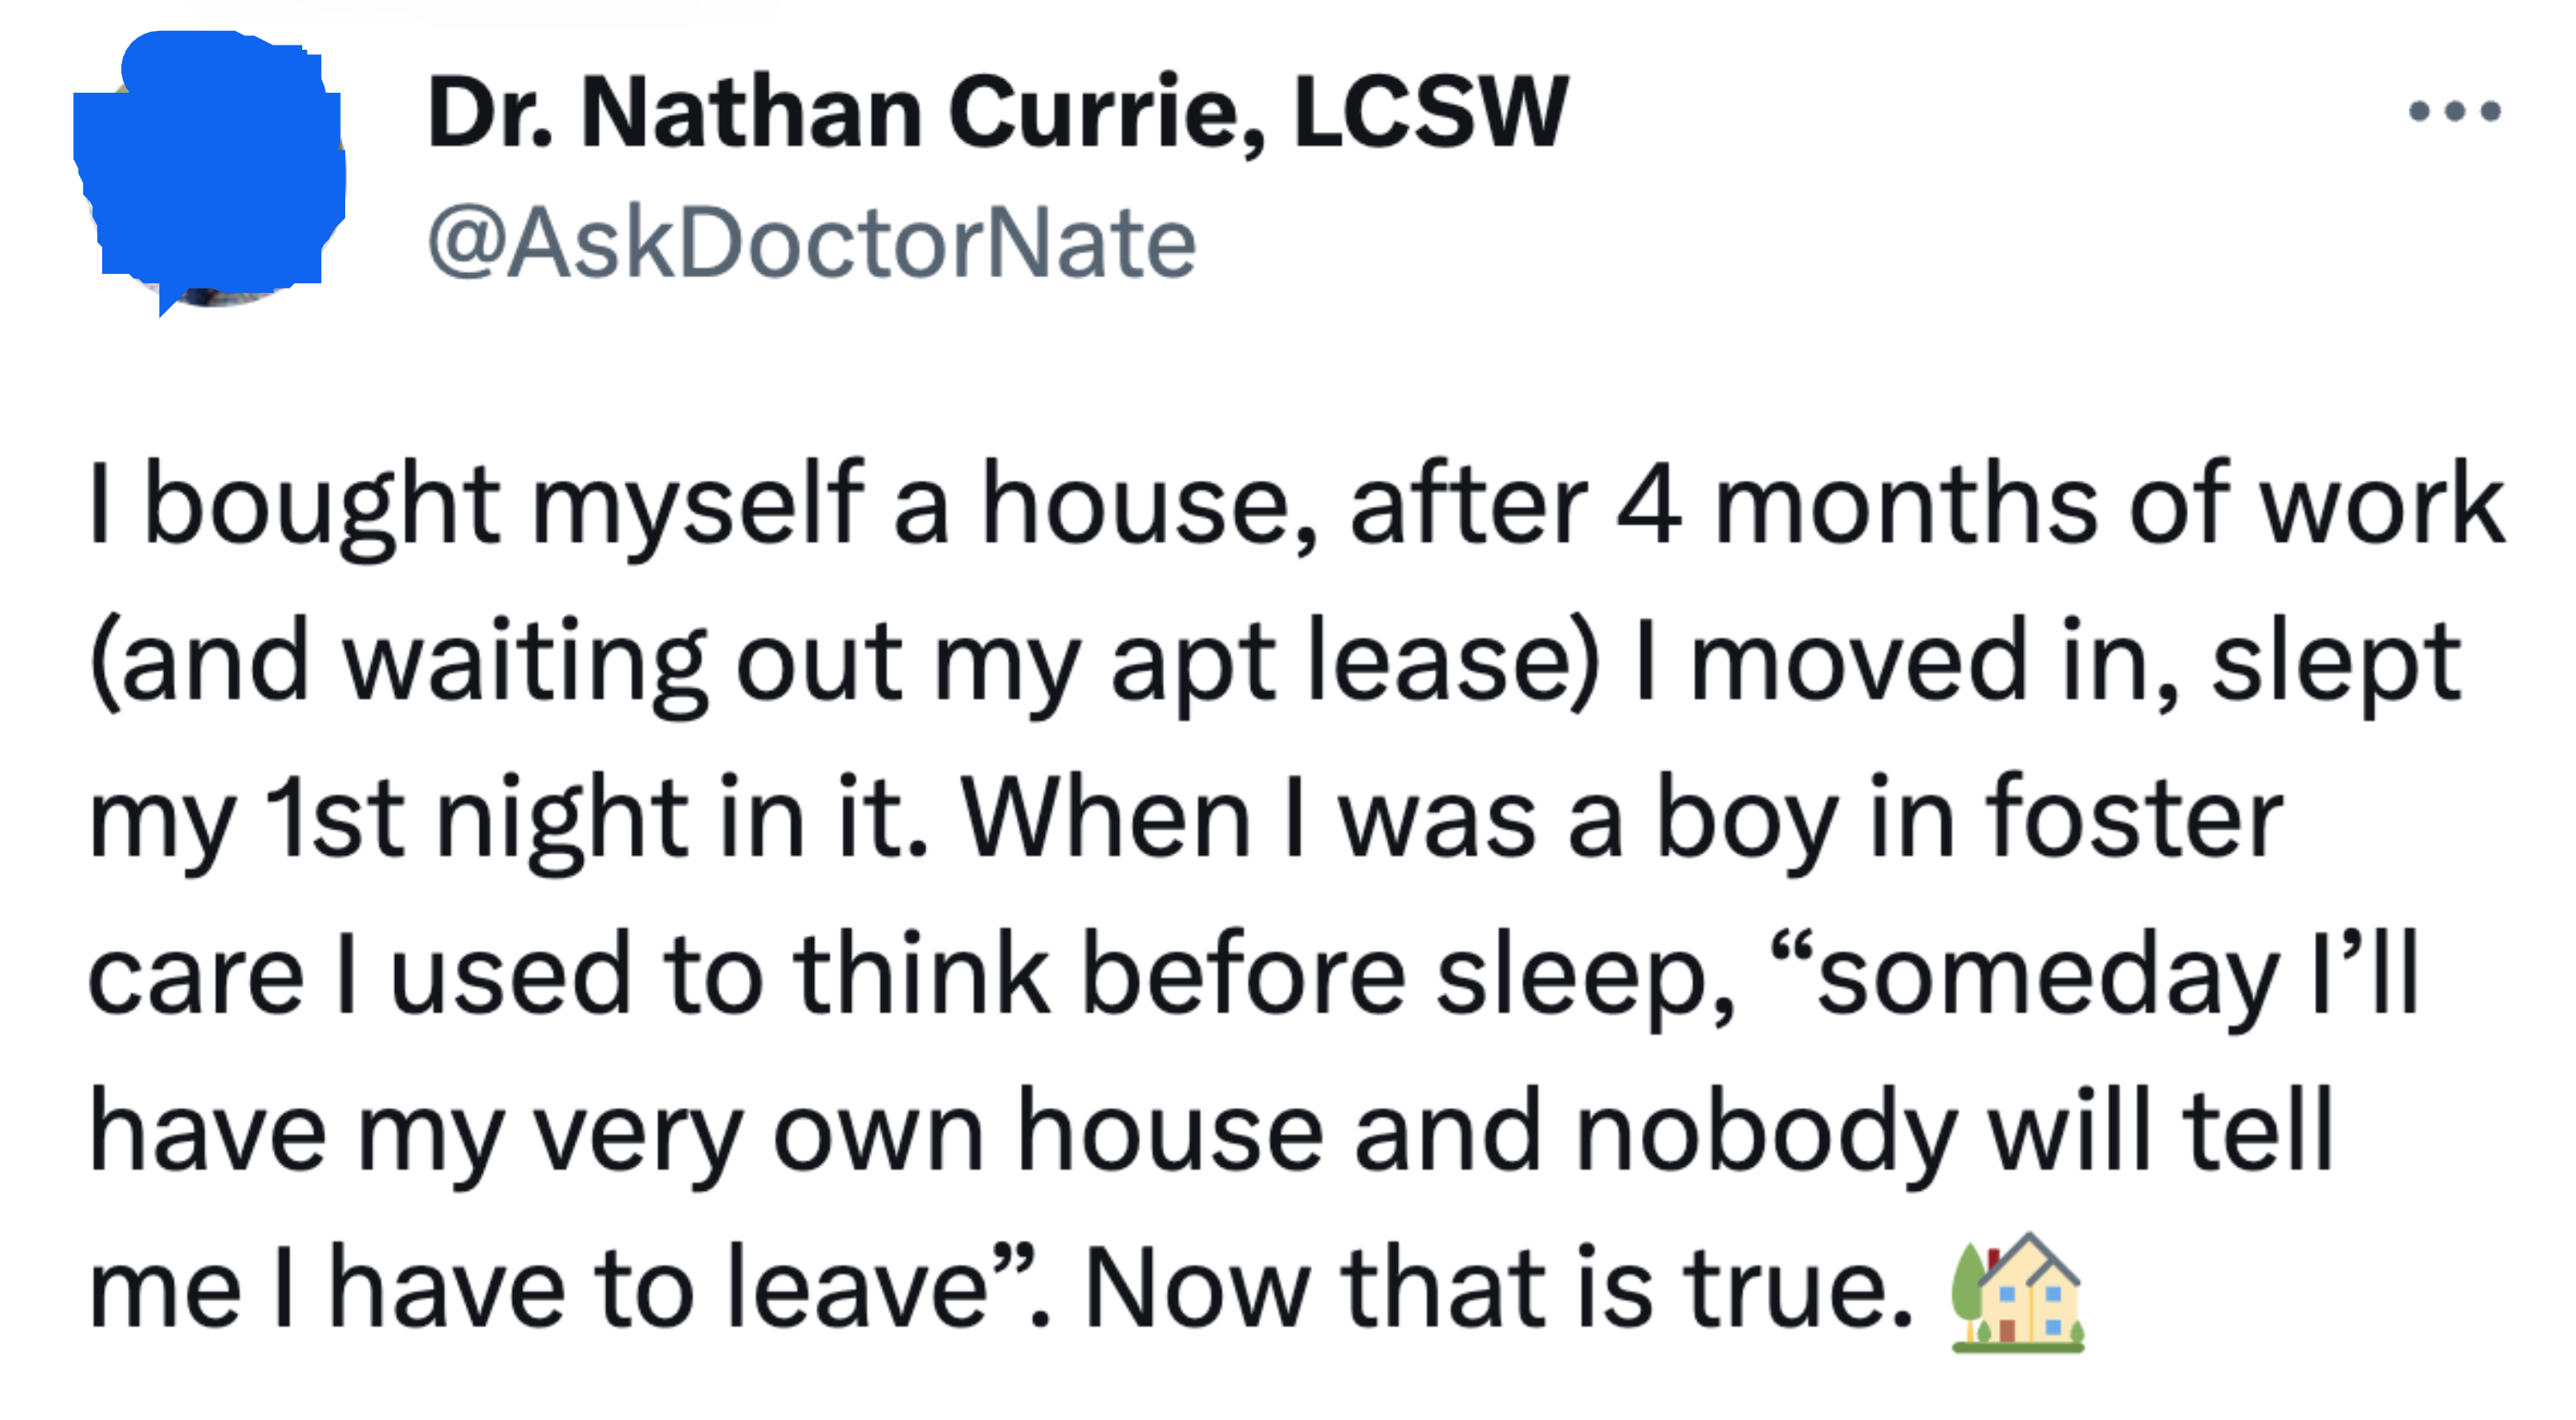 A person bought themself a house, moved in, and slept their first night in it and says, &quot;When I was a boy in foster care I used to think before sleep, &#x27;Someday I&#x27;ll have my very own house and nobody will tell me I have to leave; now that is true&quot;